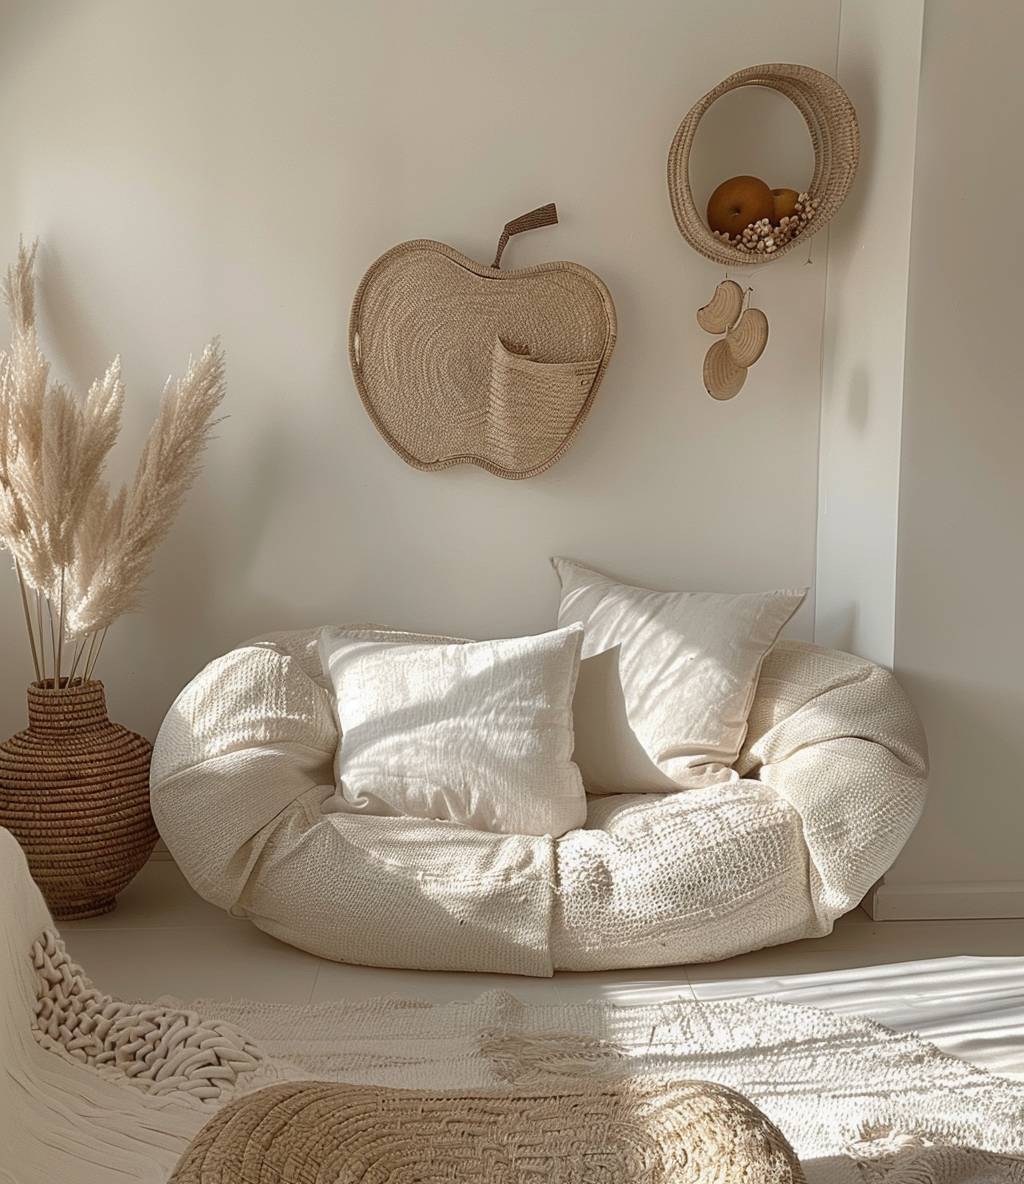 A large wicker wall basket in the shape of an apple, with big open pockets for hanging on the wall. The basket is made from natural rattan material and has a rough texture. It is a cute product photo for decor. Soft neutral colors including light beige and cream in the style of boho style.